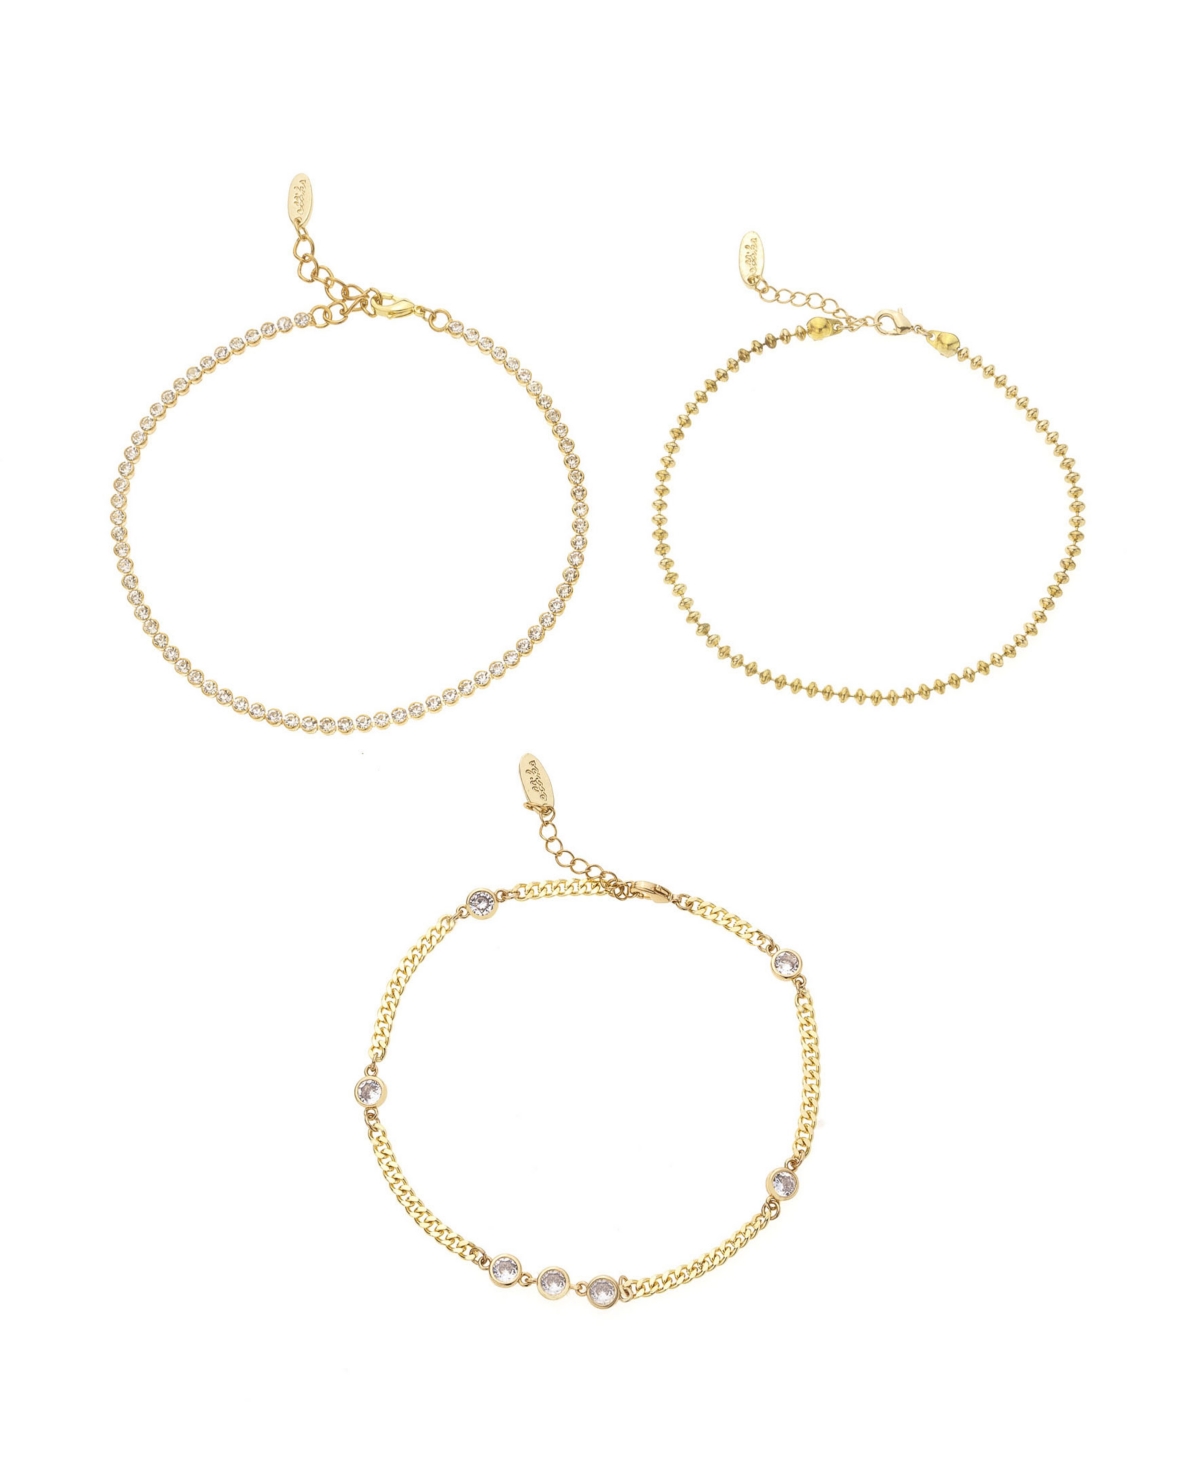 Dainty 18K Gold Plated Chain Anklet Set - Gold-Tone